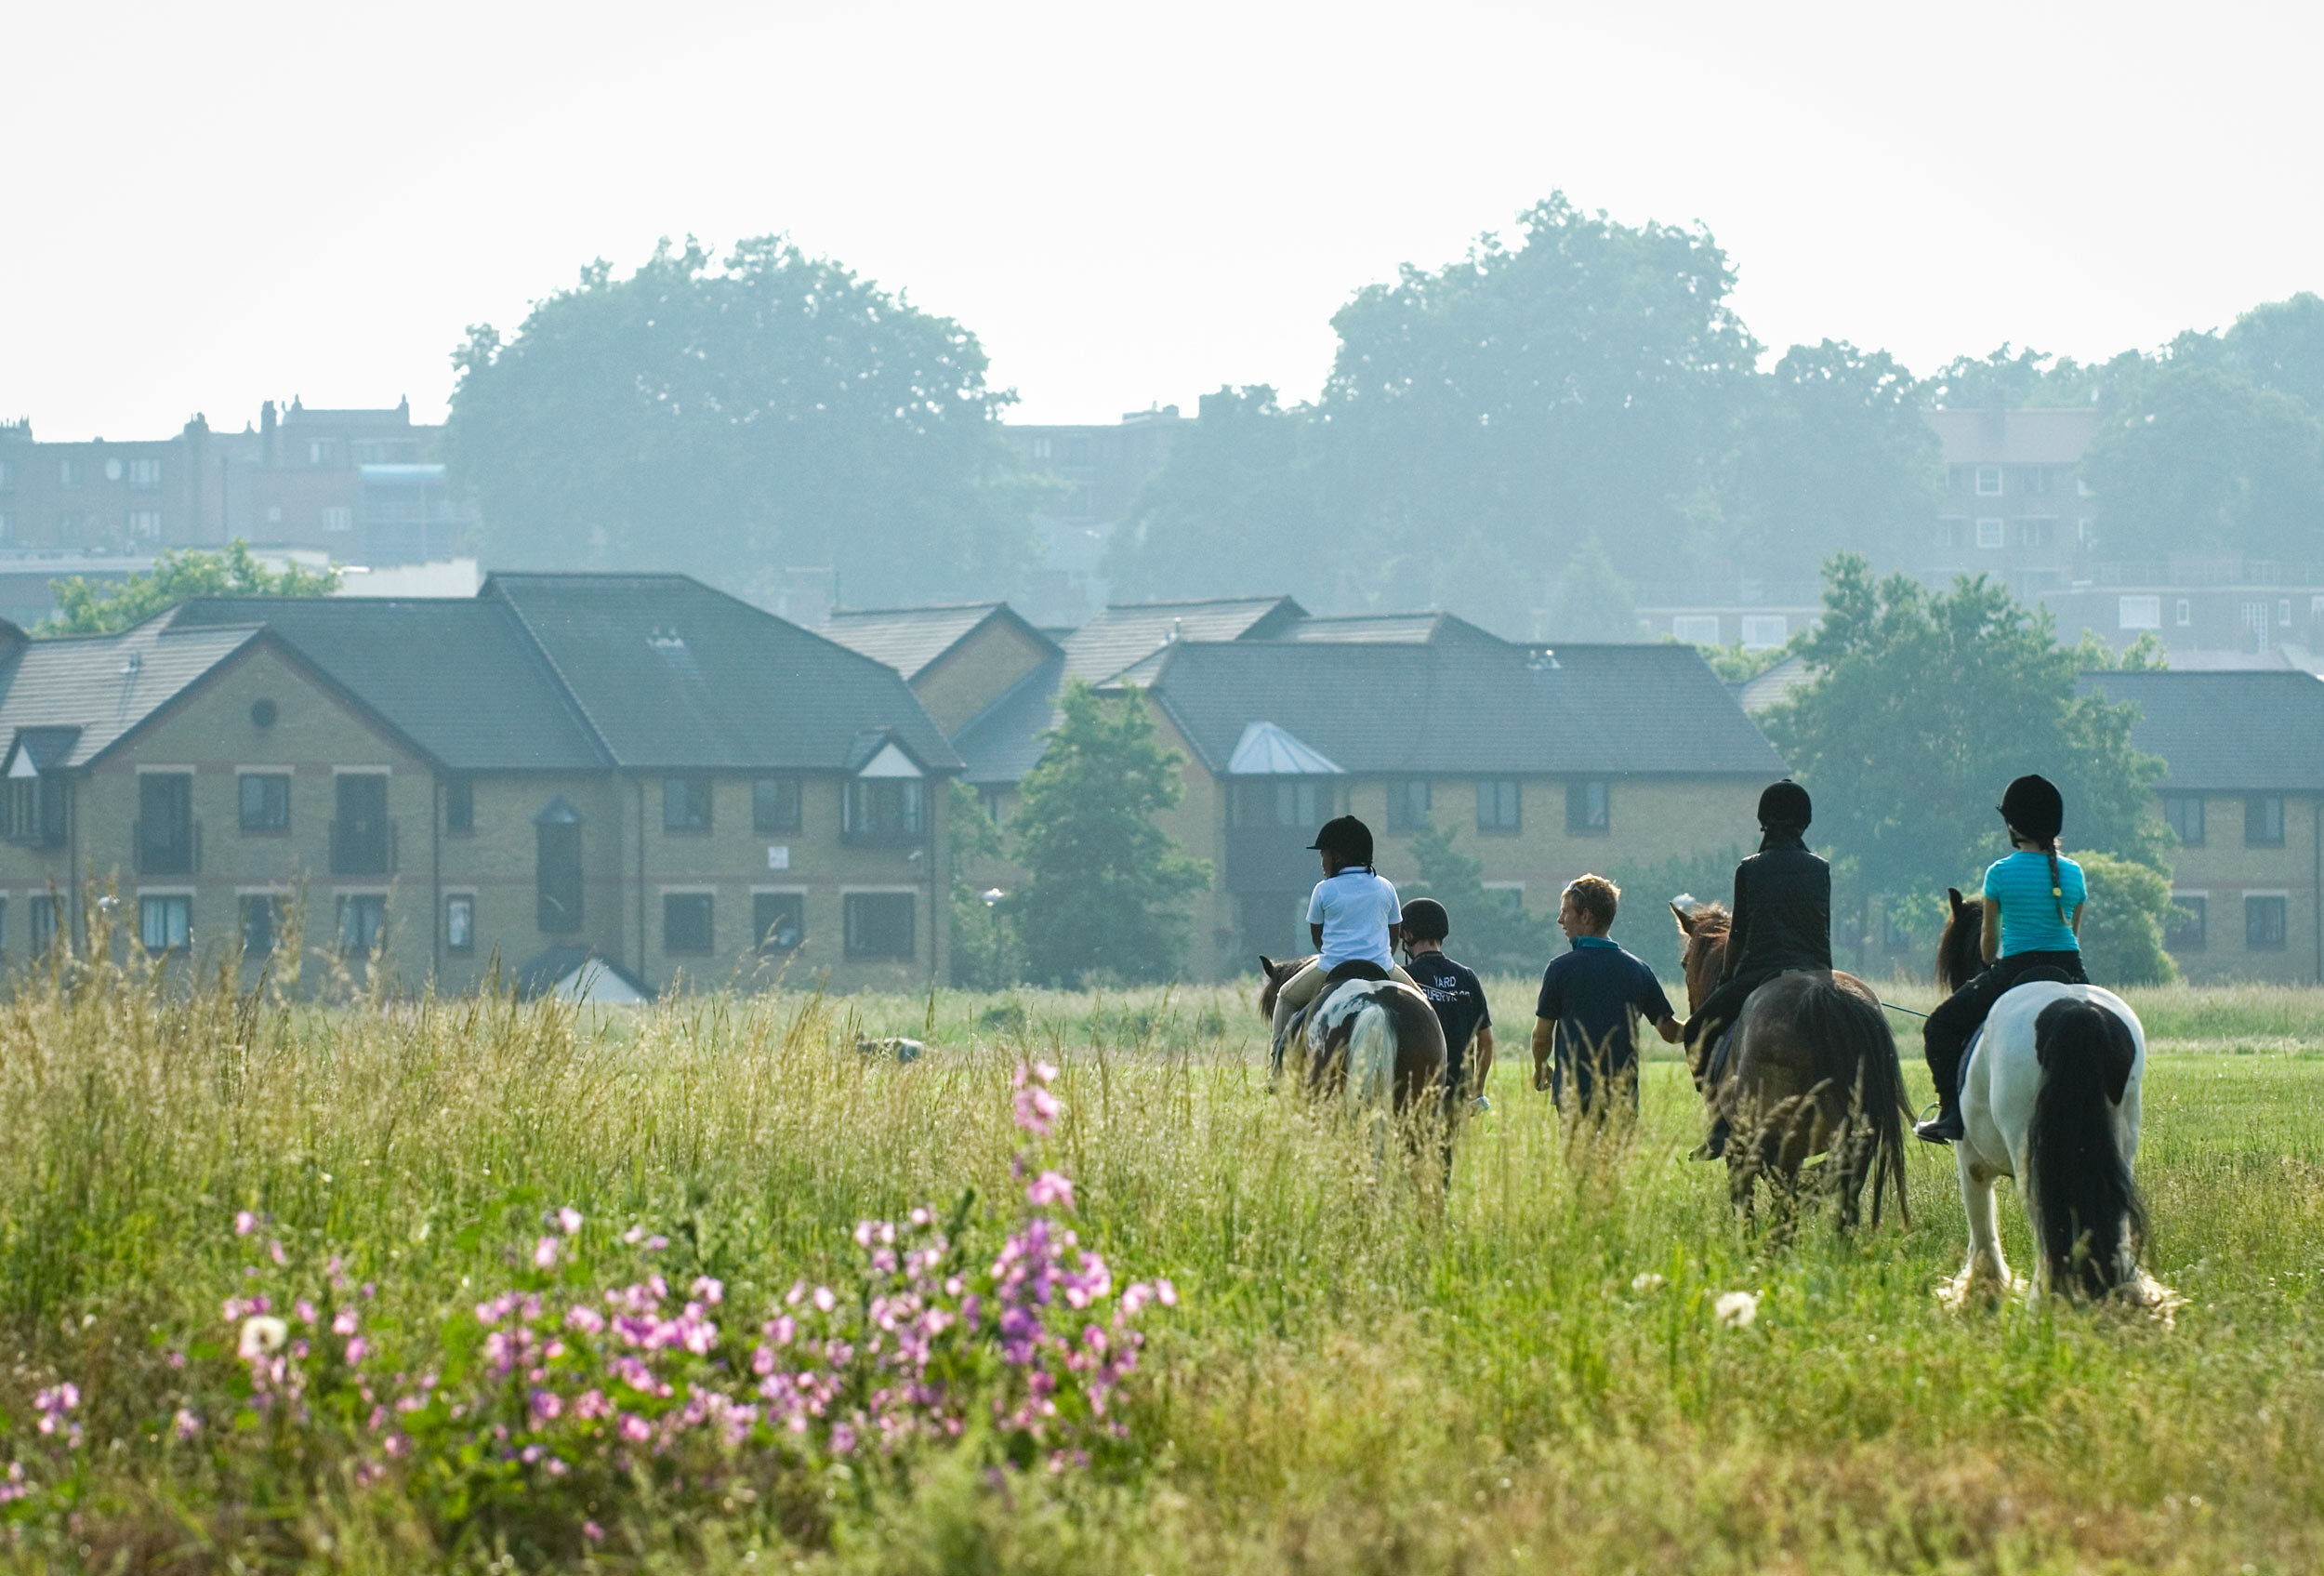  Lee Valley Park. Lee Valley Riding Centre, London E10, UK. Horse riding on Walthamstow Marshes.  Shot by Eleanor Bentall, photographer.  